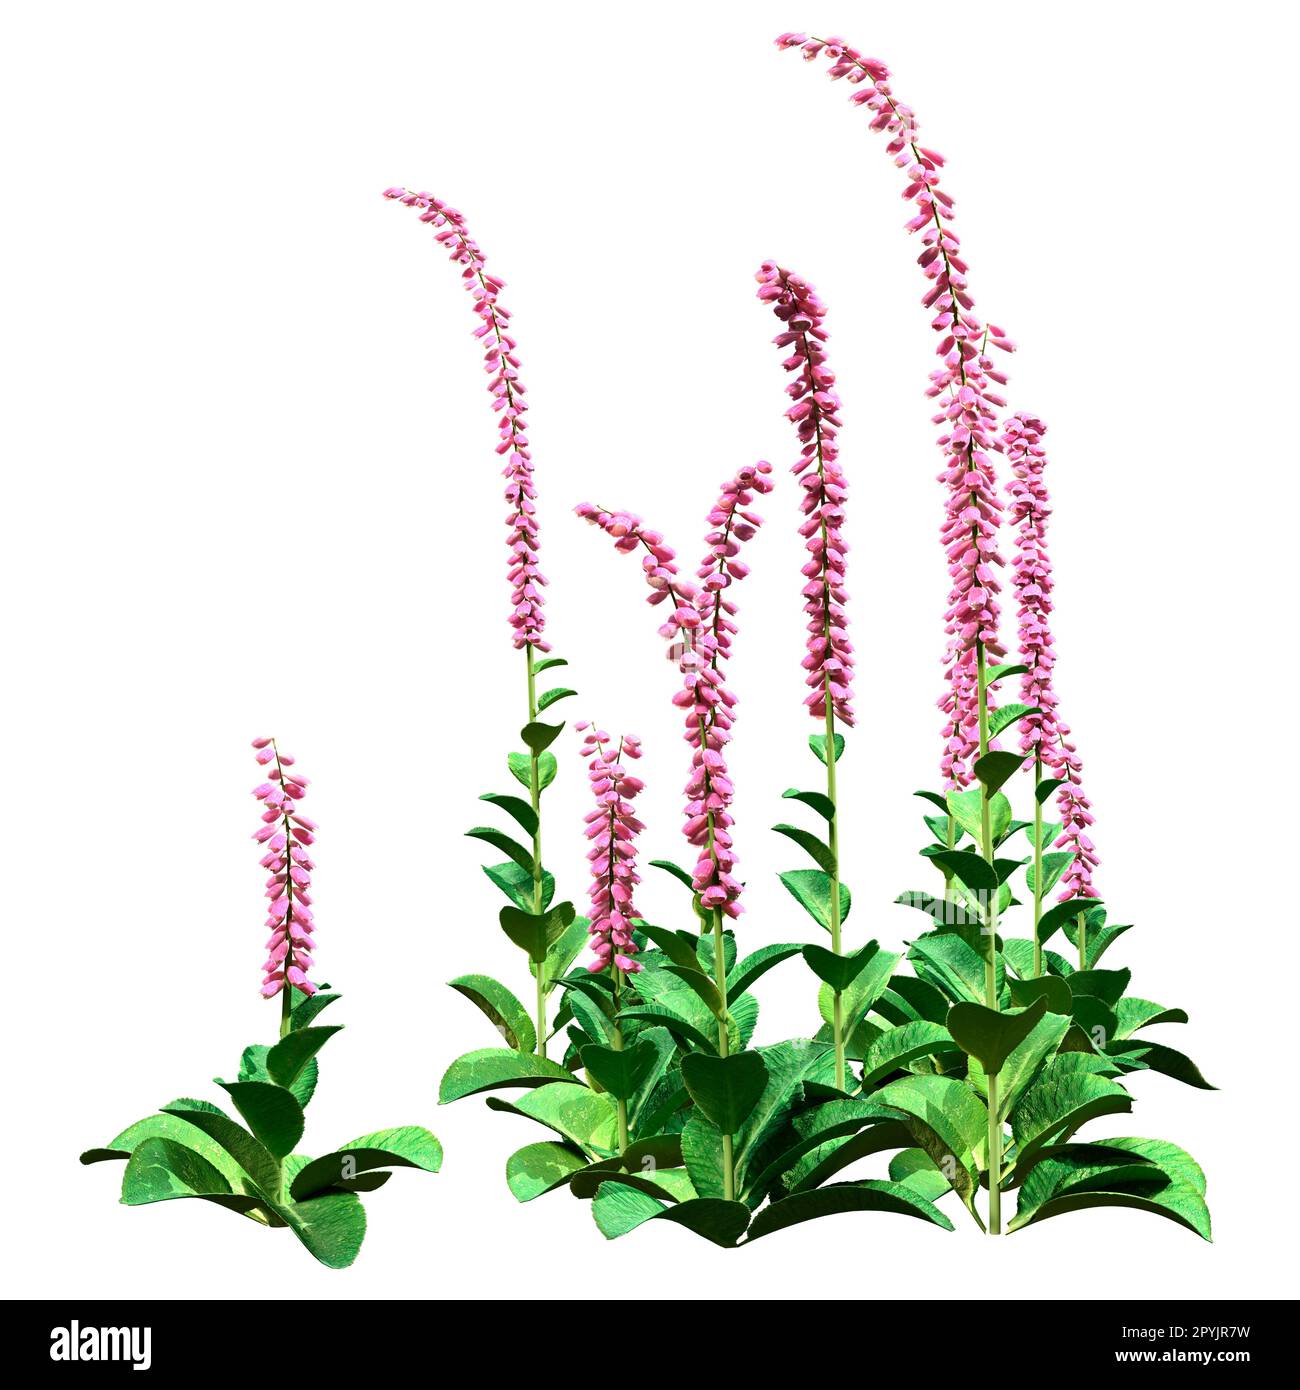 3D rendering of foxglove plants or Digitalis purpurea or common foxglove isolated on white background Stock Photo